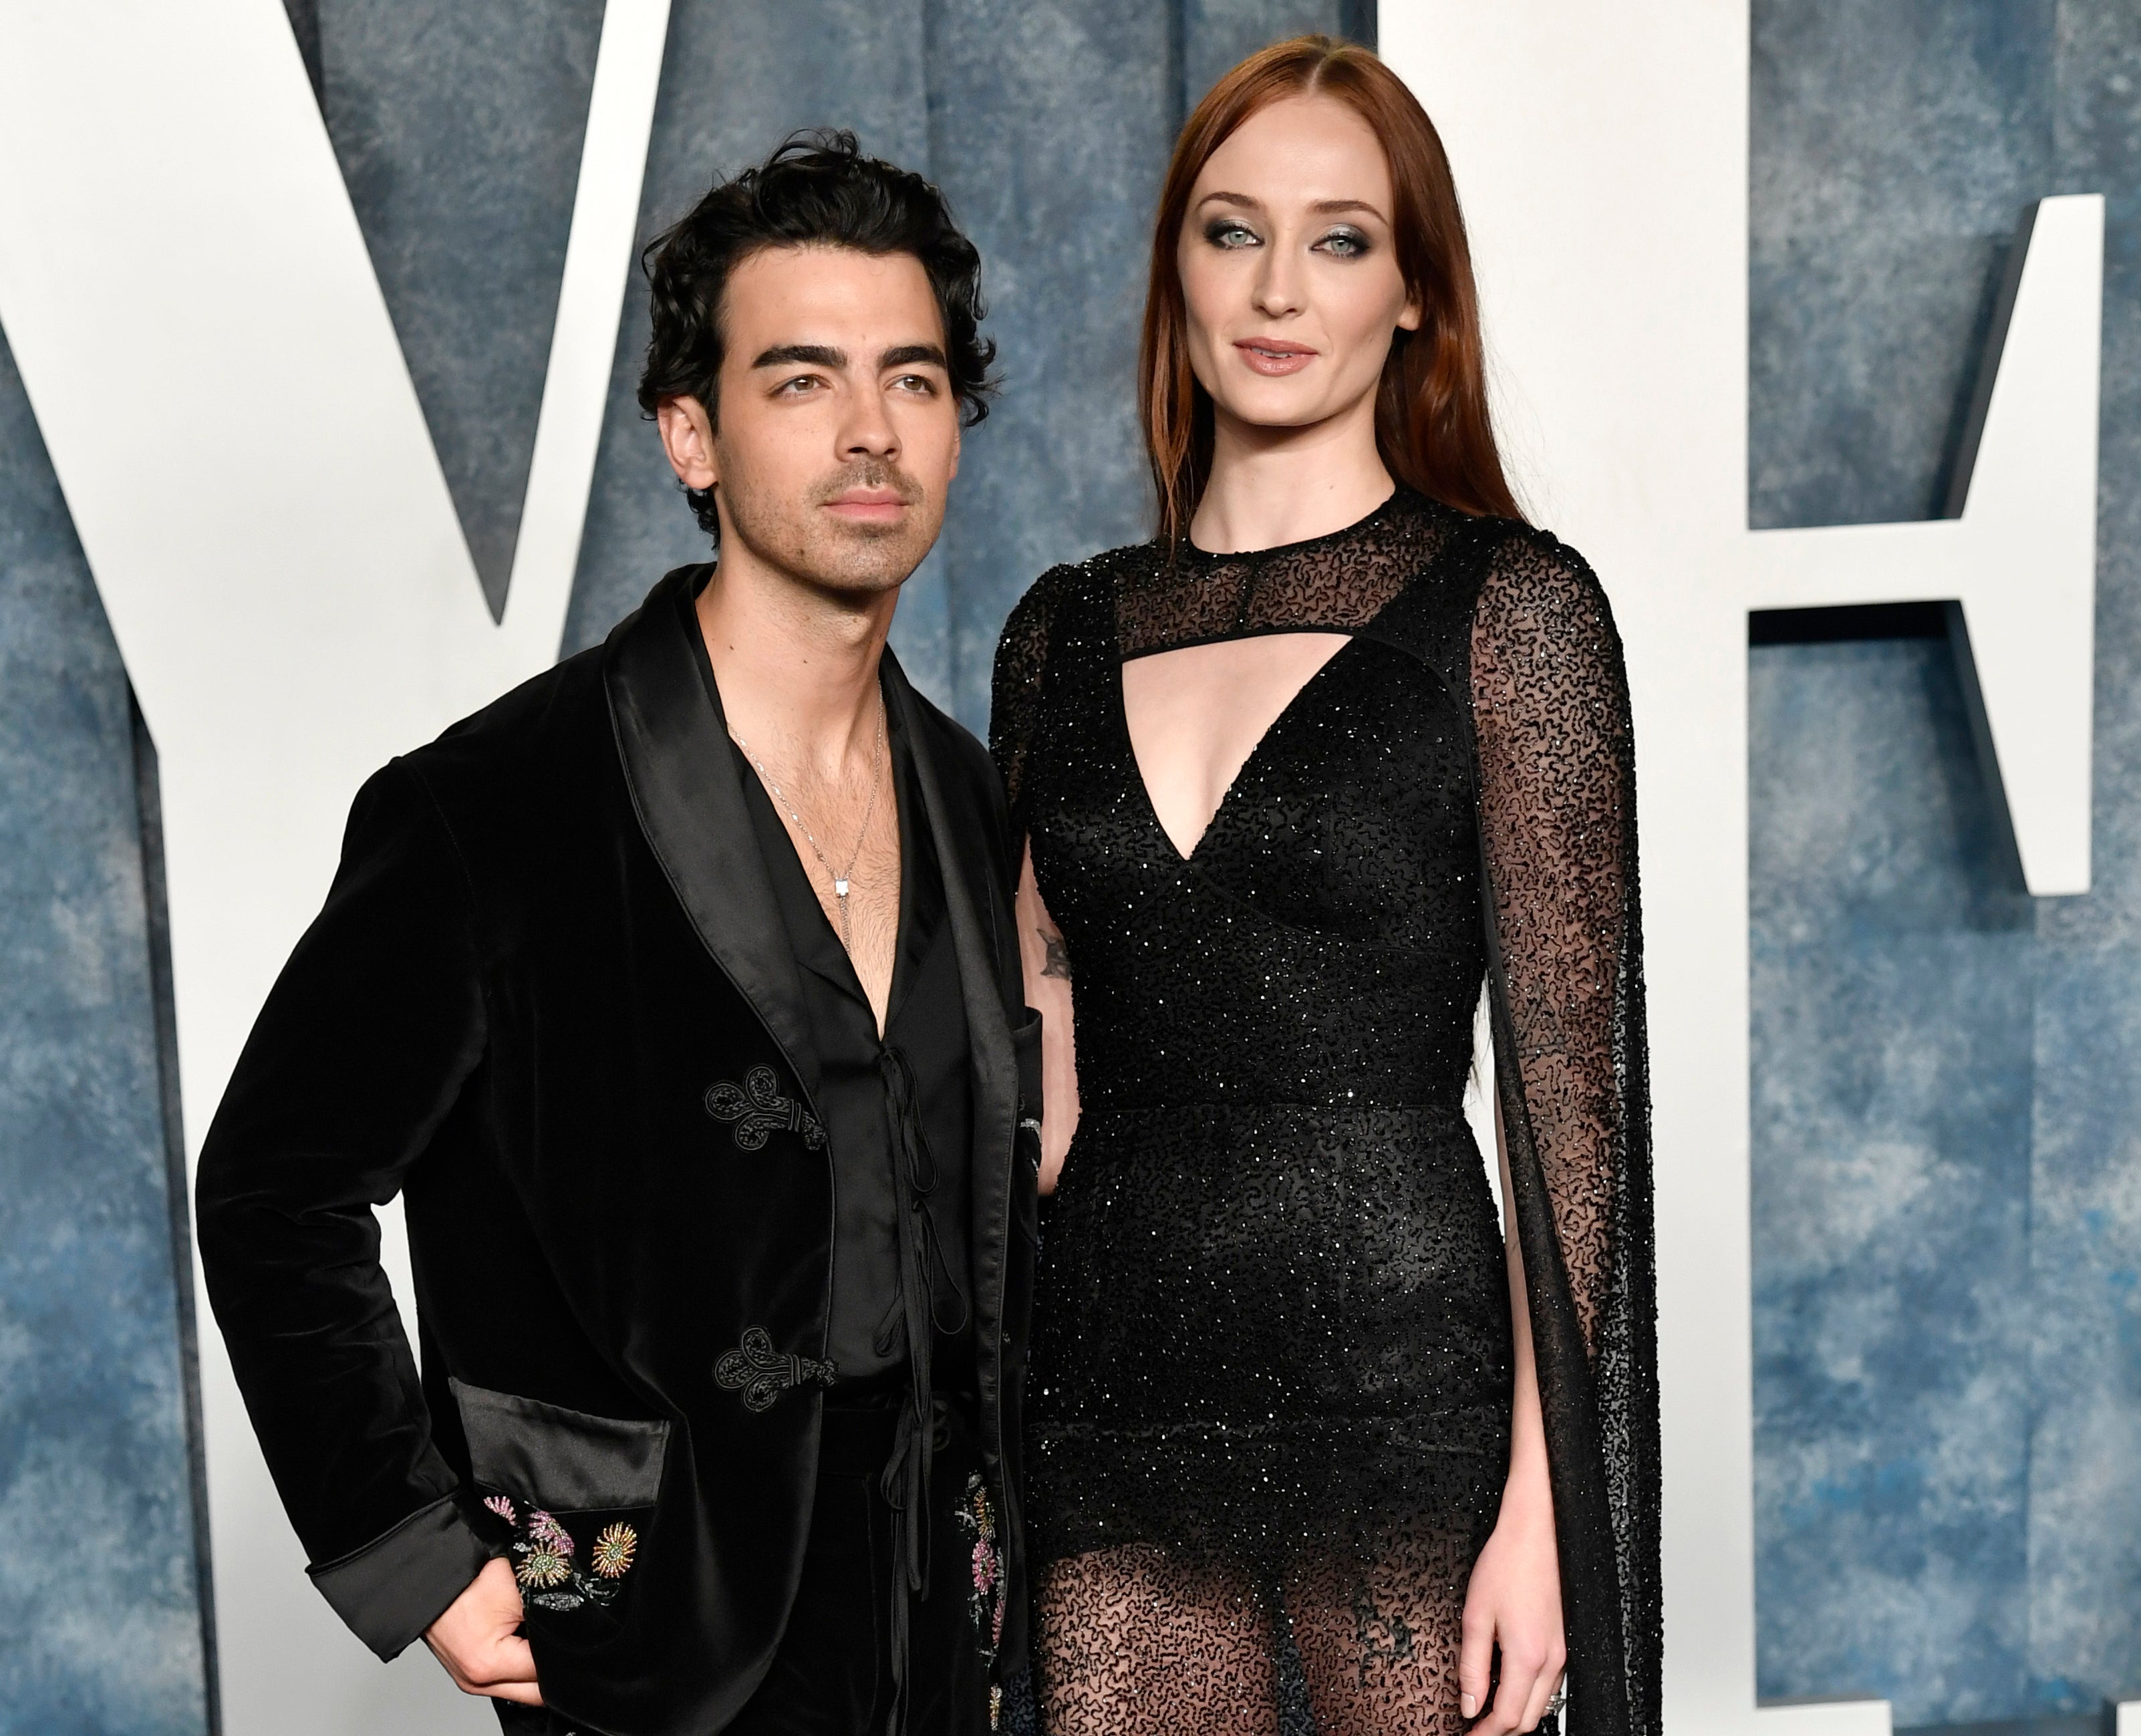 Joe Jonas and Sophie Turner appear at the Vanity Fair Oscar Party on 12 March 2023